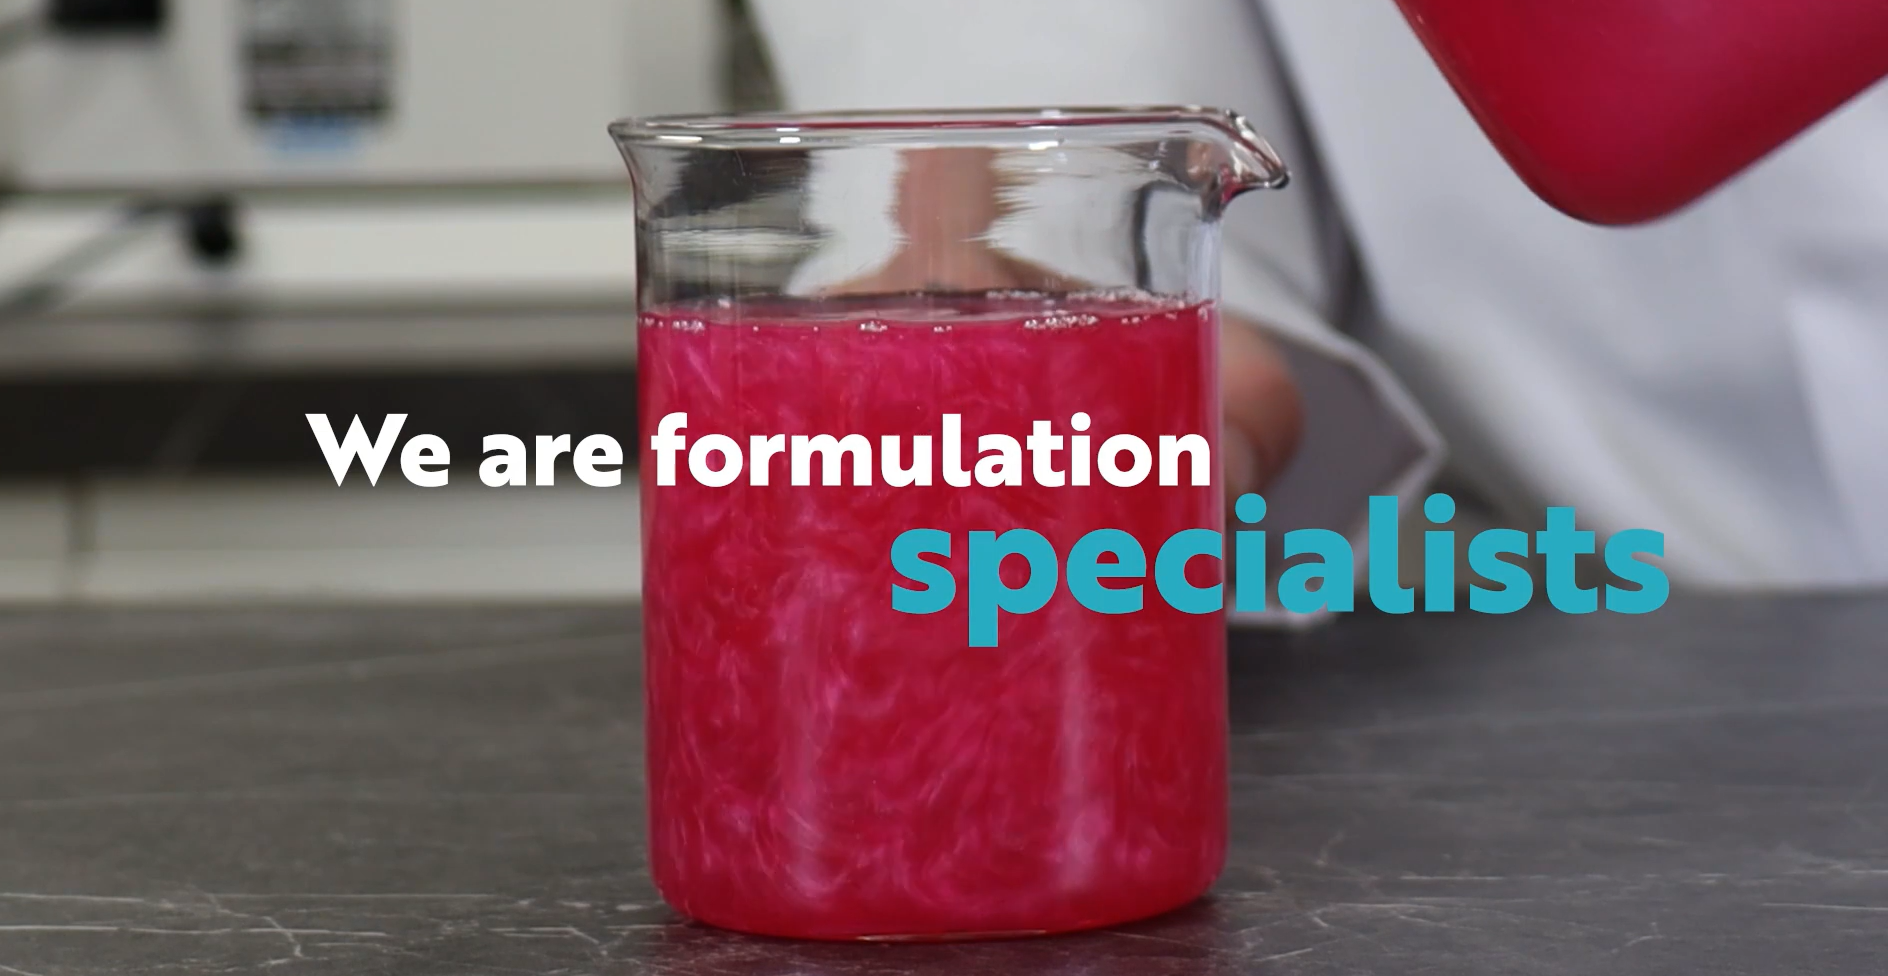 We are formulation specialists. Click to watch Group55's company overview video